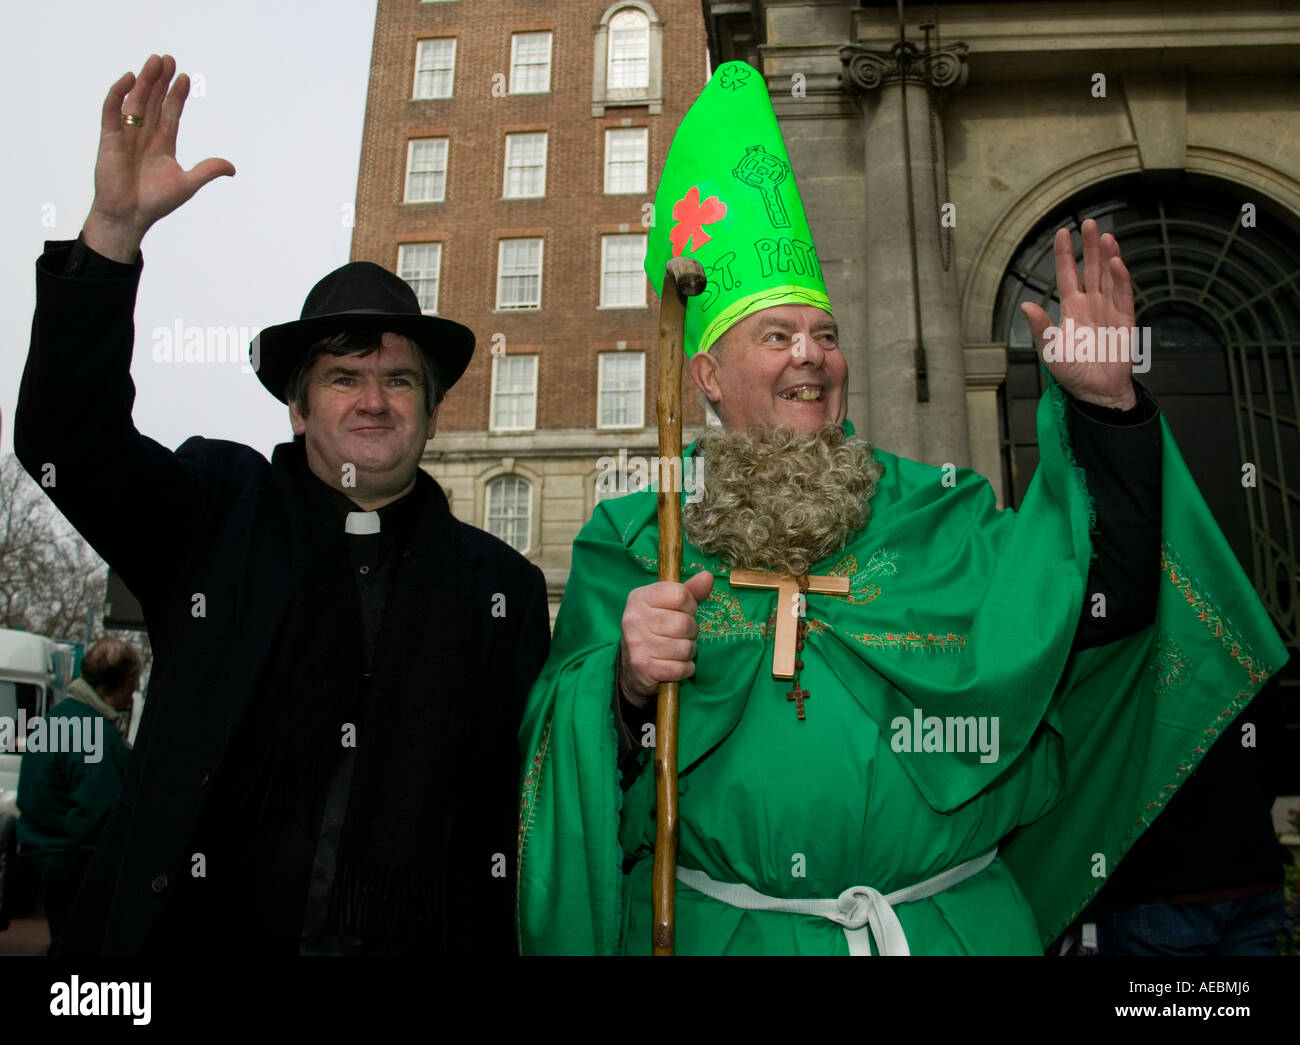 St Patrick's Day Parade, Londres, Angleterre, Royaume-Uni Banque D'Images